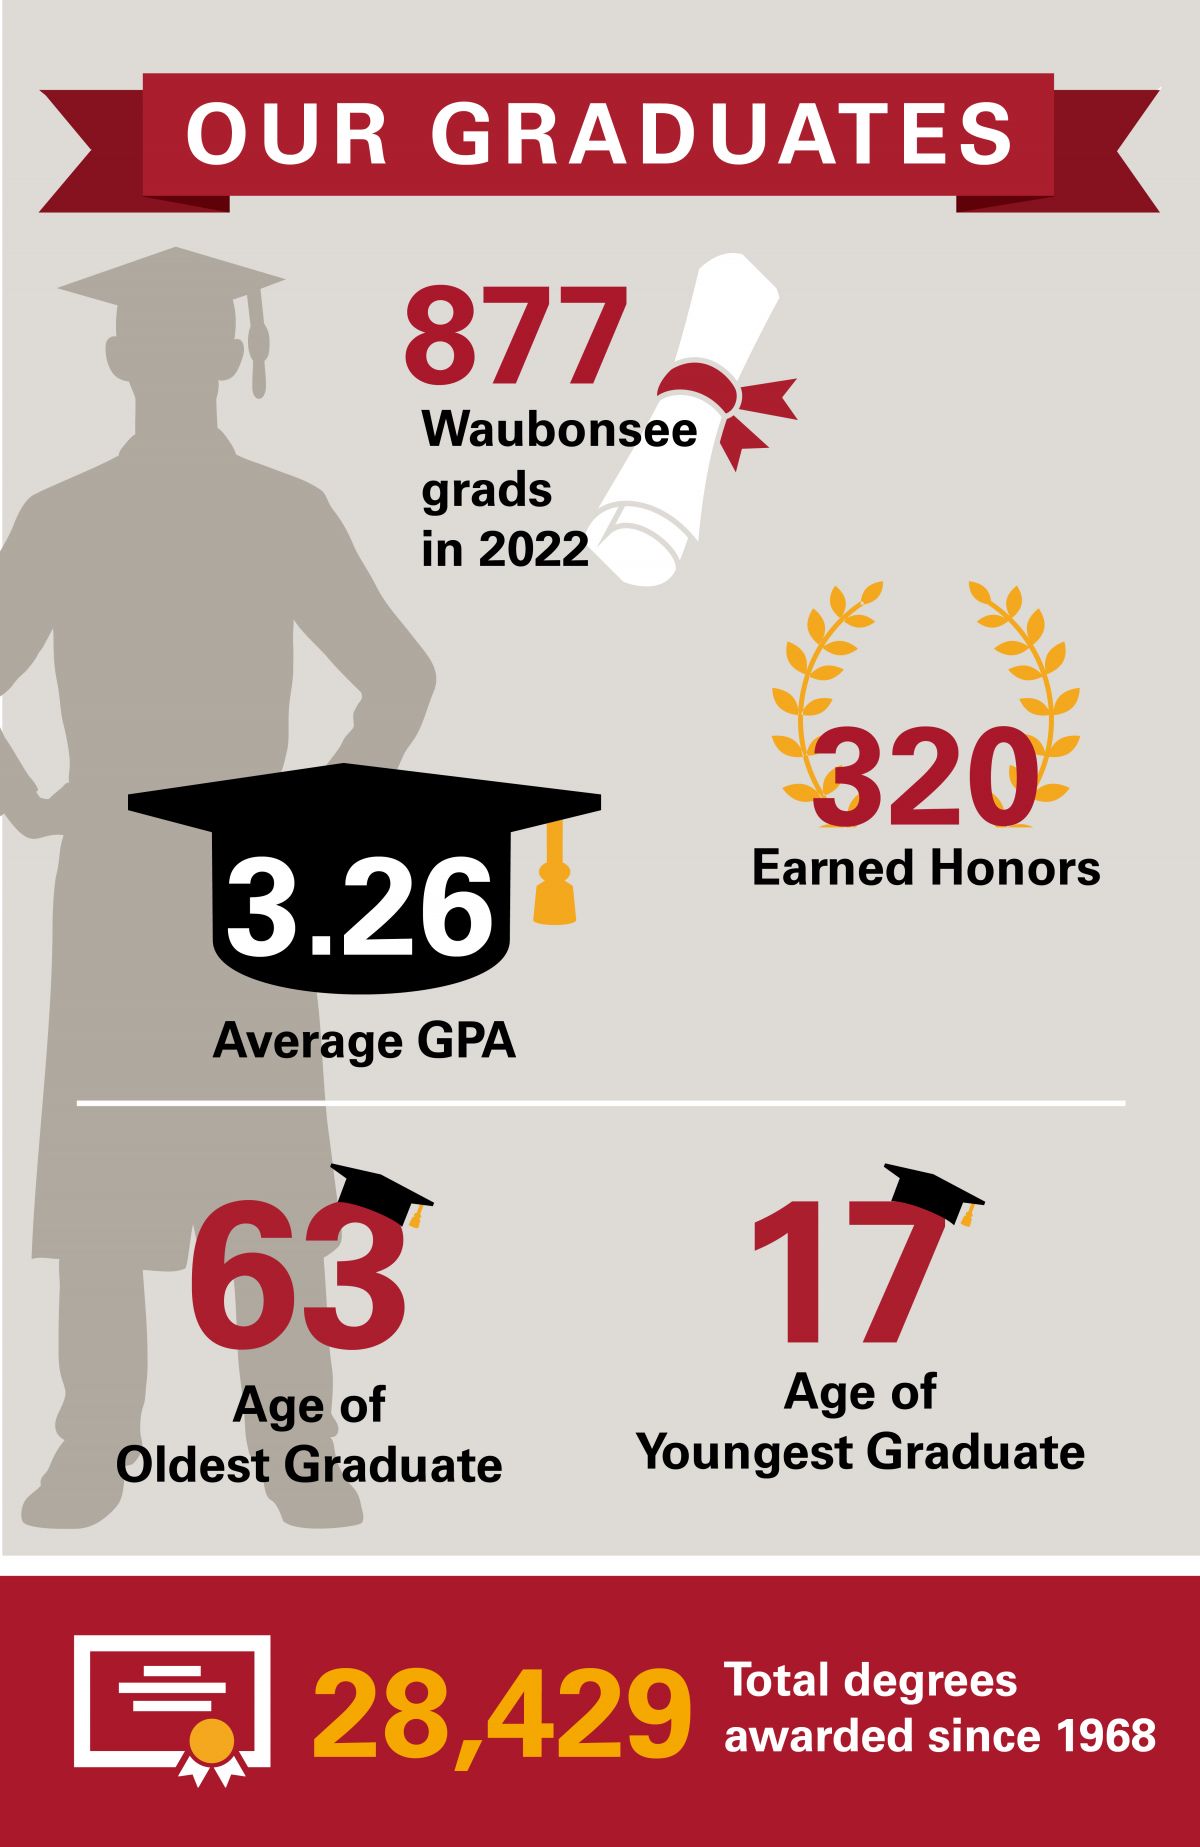 Our Graduates: 877 Waubonsee Grads in 2022; 3.26 Average GPA; 320 Earned Honors; Age of Oldest Graduate is 63; Age of Youngest Graduate is 17; 28,429 Total Degrees awarded since 1968